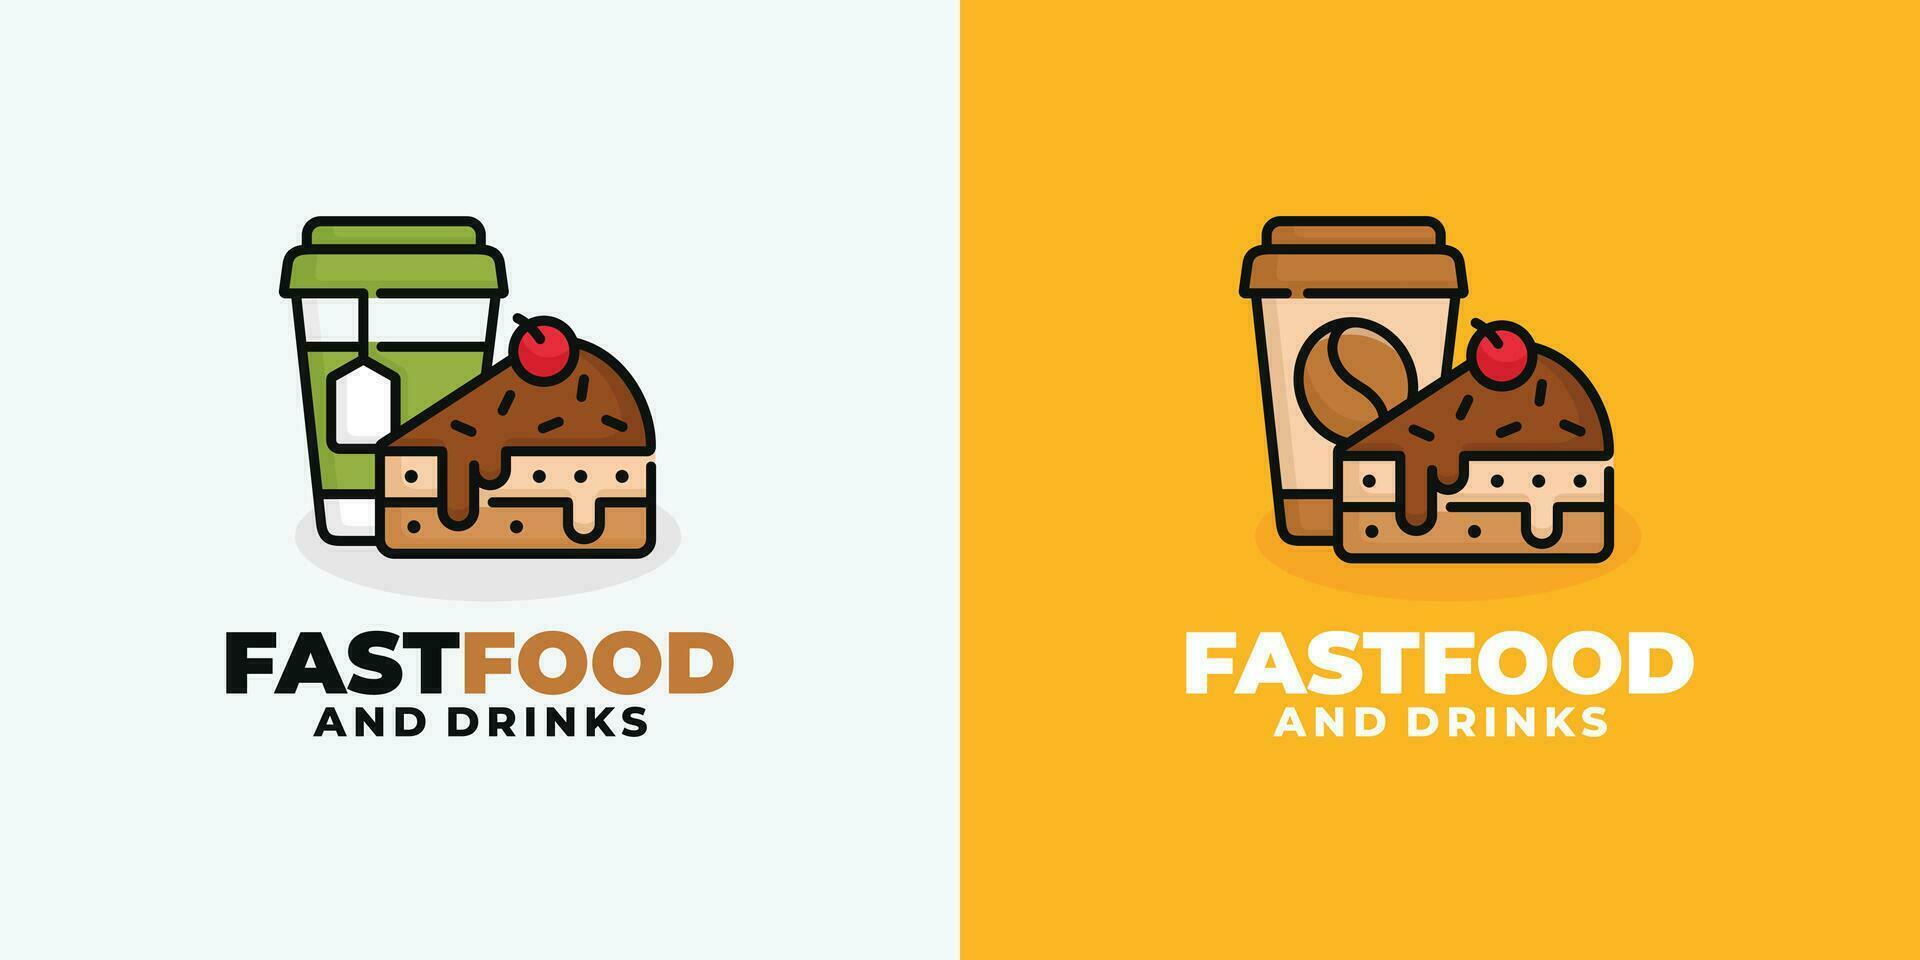 Cake and drink fast food logo design vector